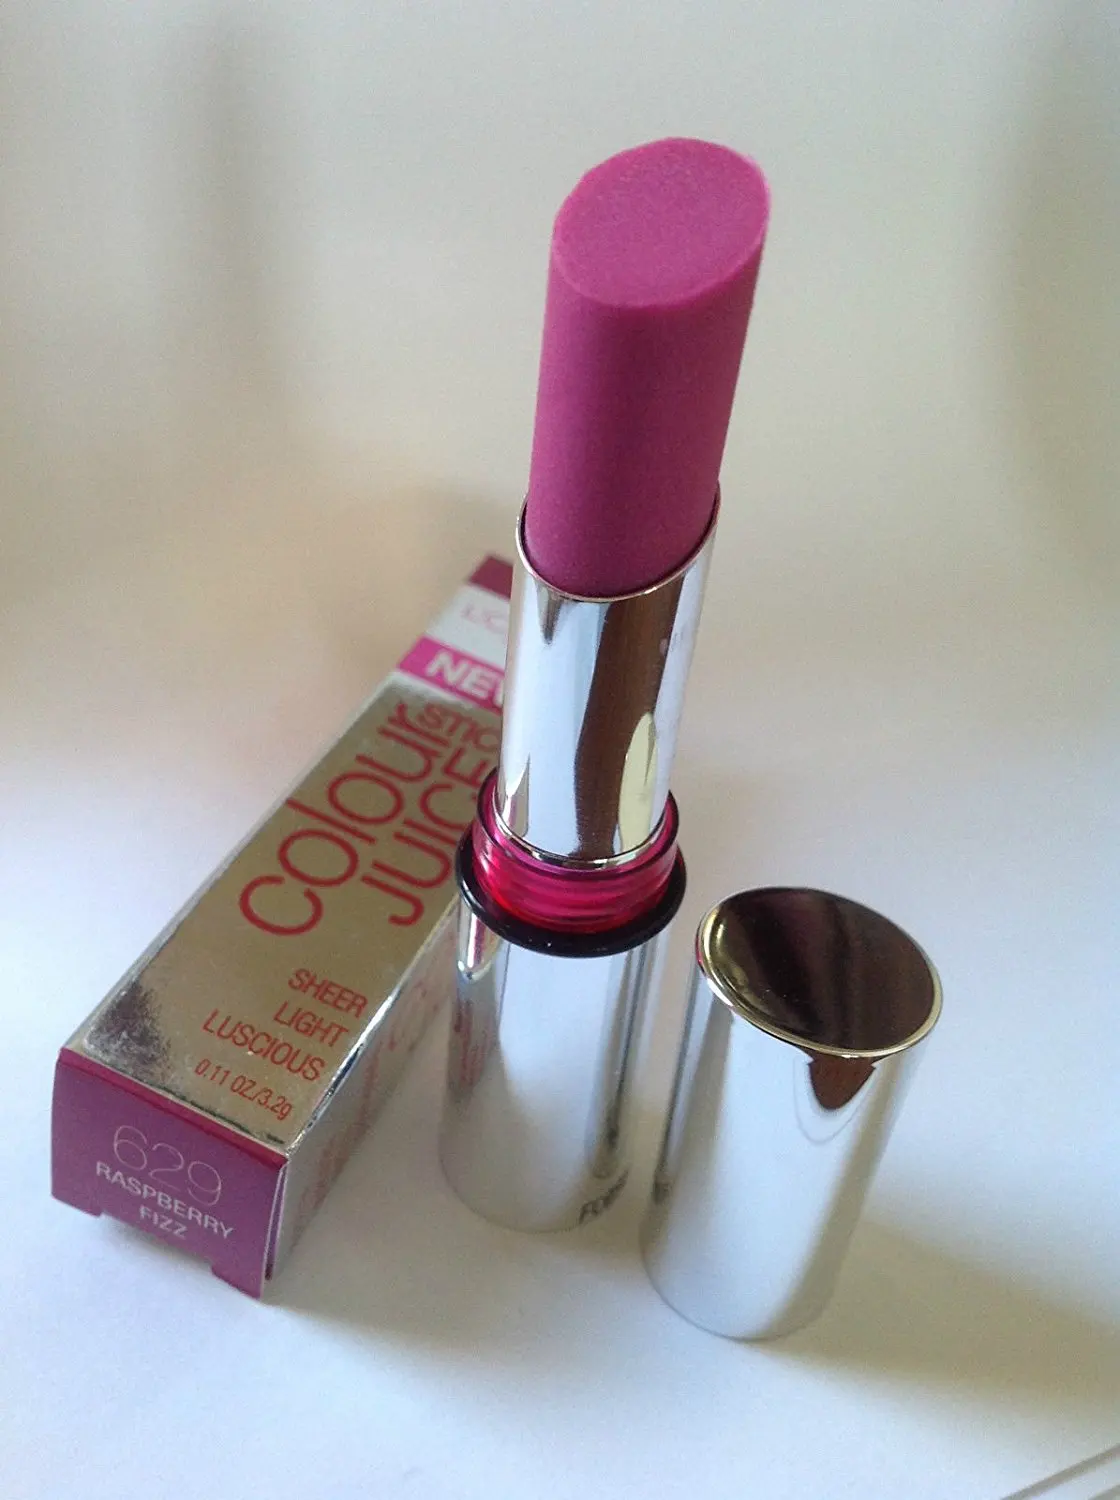 Buy Loreal Colour Juice Stick Lipstick in a Jam! #718 Full Size (0.11